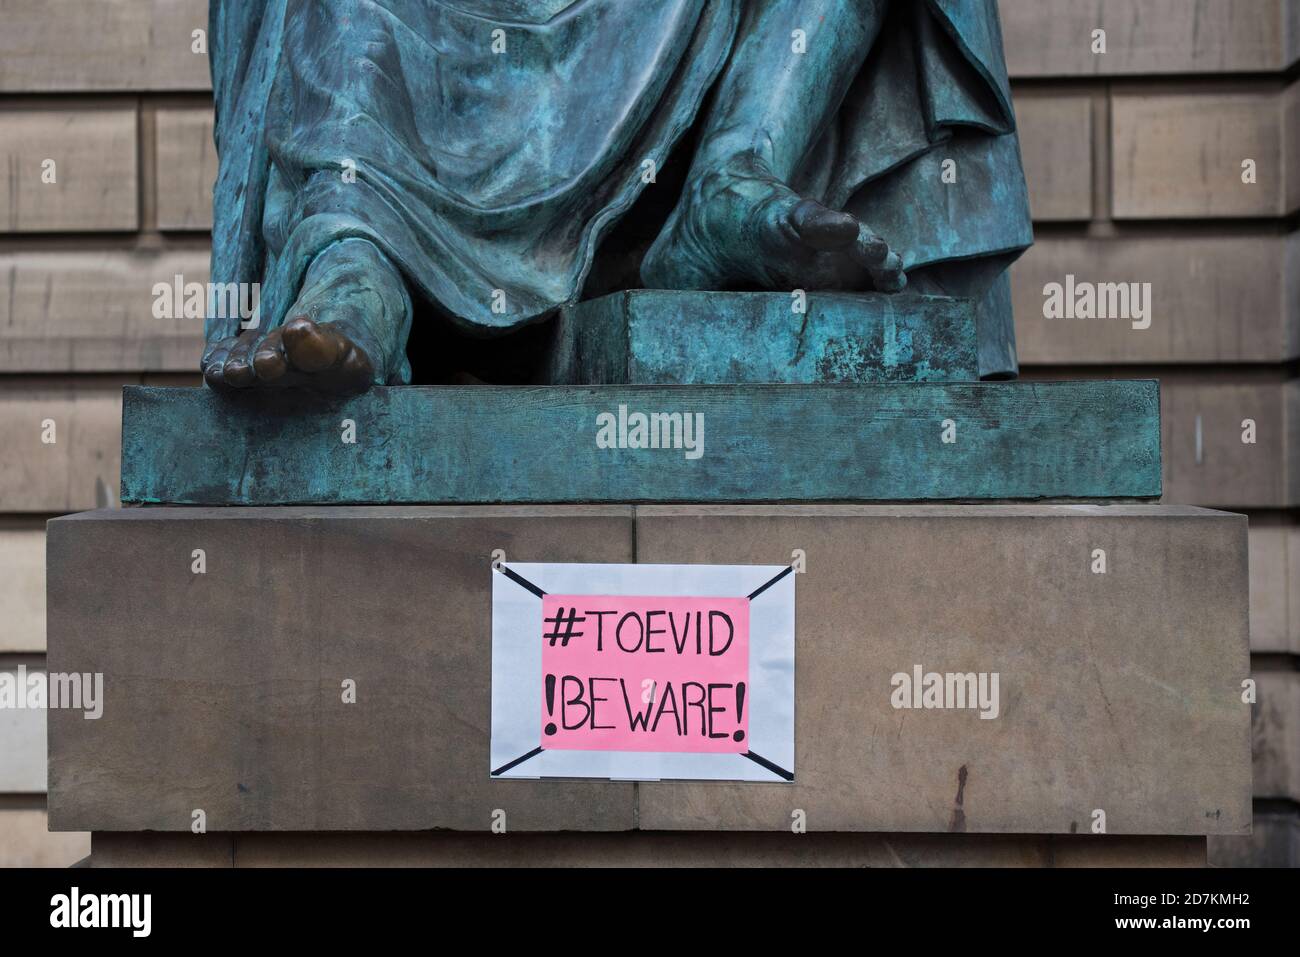 #Toevid !Beware! sign on the statue of the philosopher and historian David Hume by sculptor Sandy Stoddart on Edinburgh's Royal Mile. Stock Photo